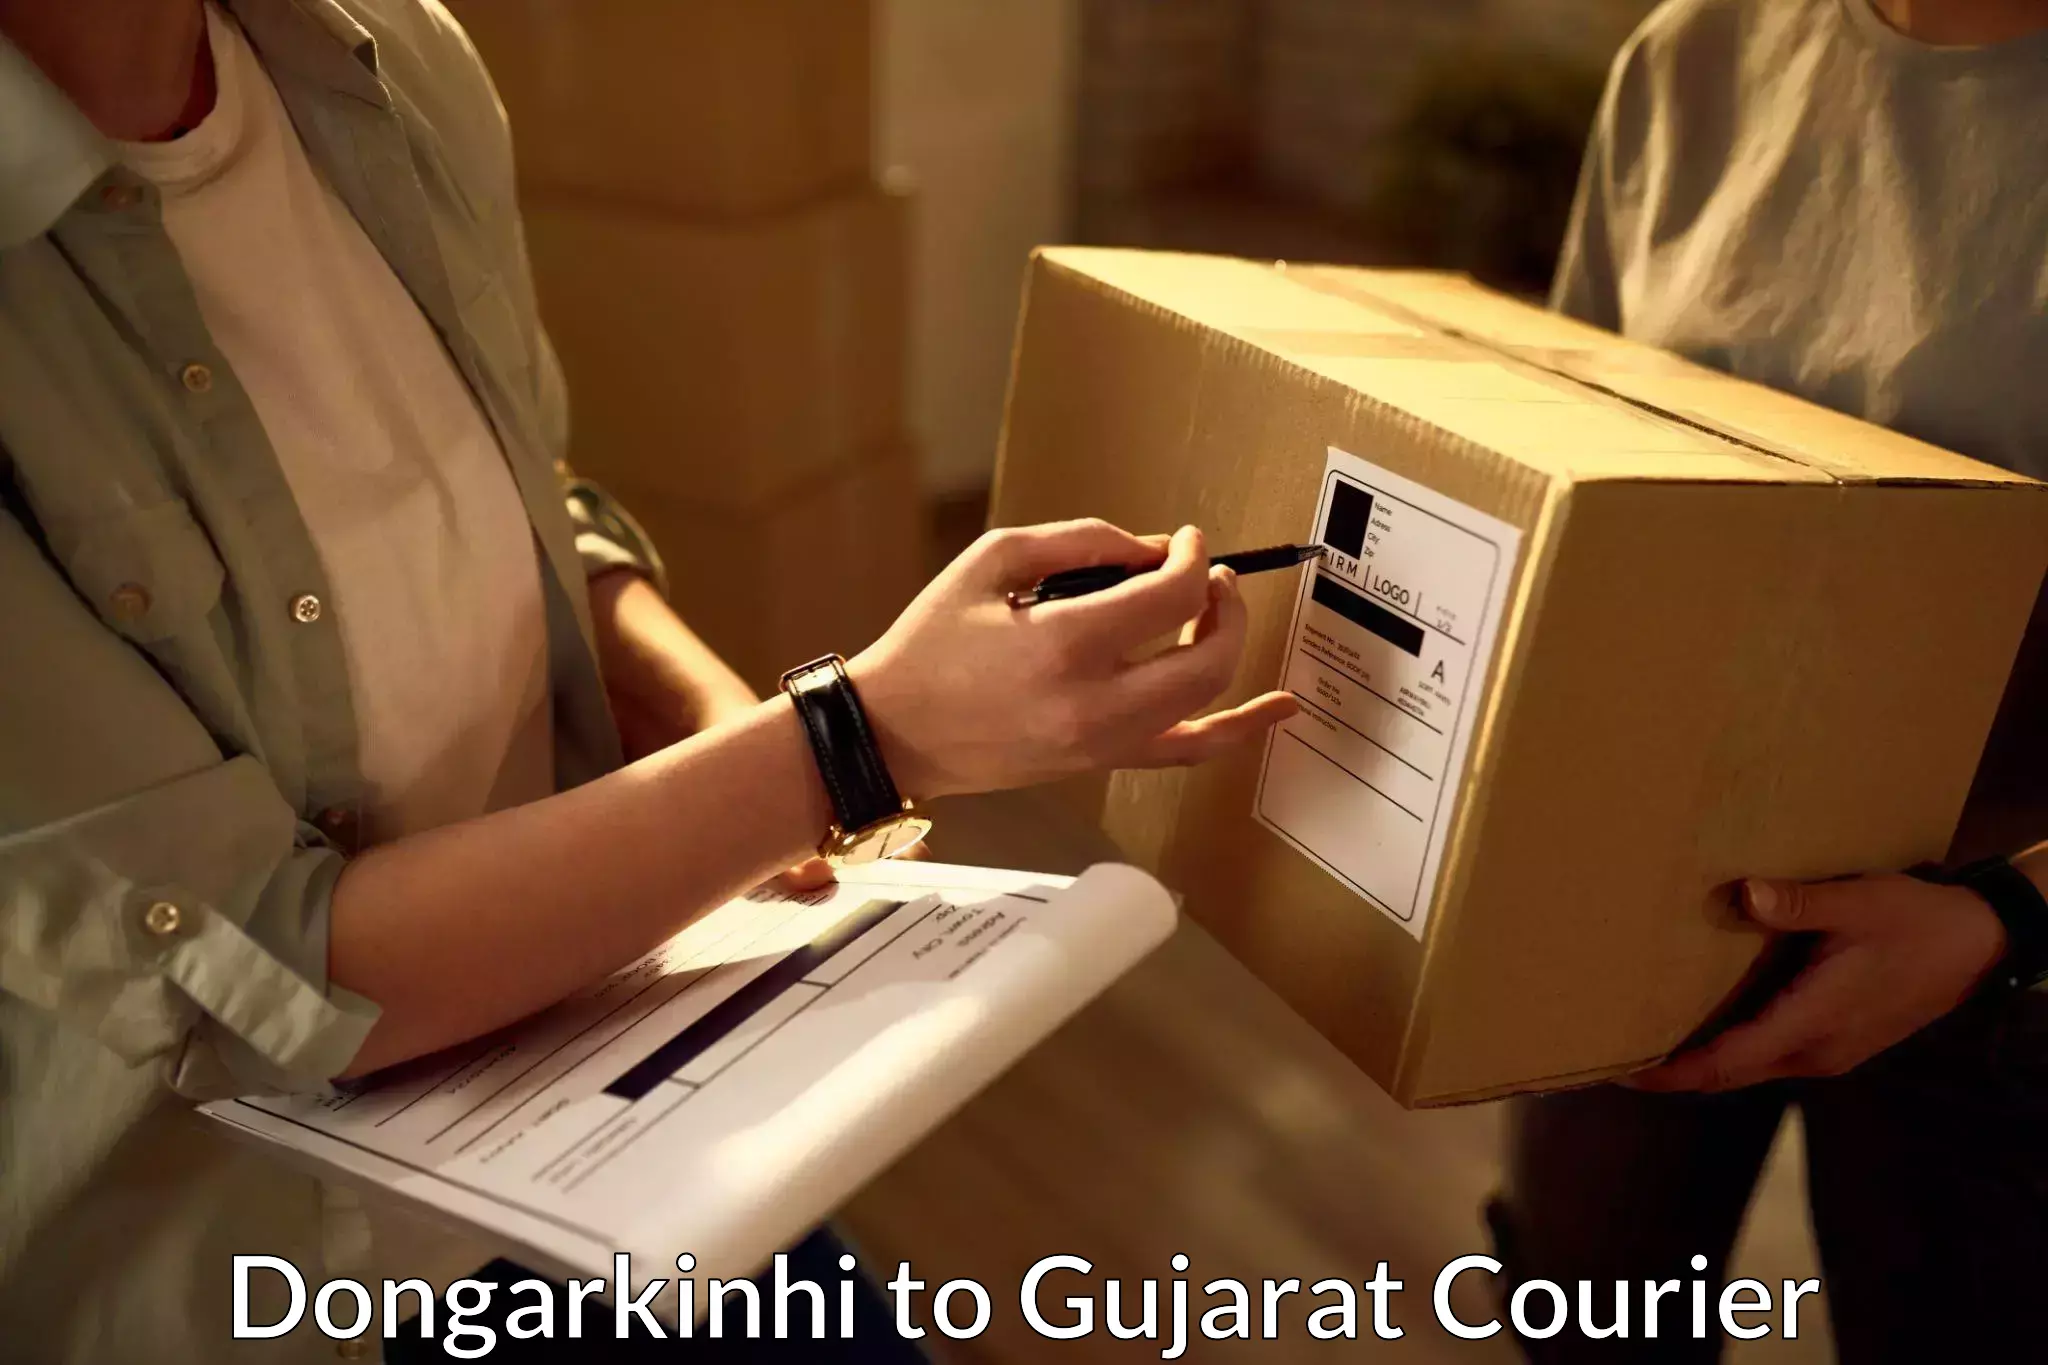 Customizable delivery plans Dongarkinhi to Gujarat